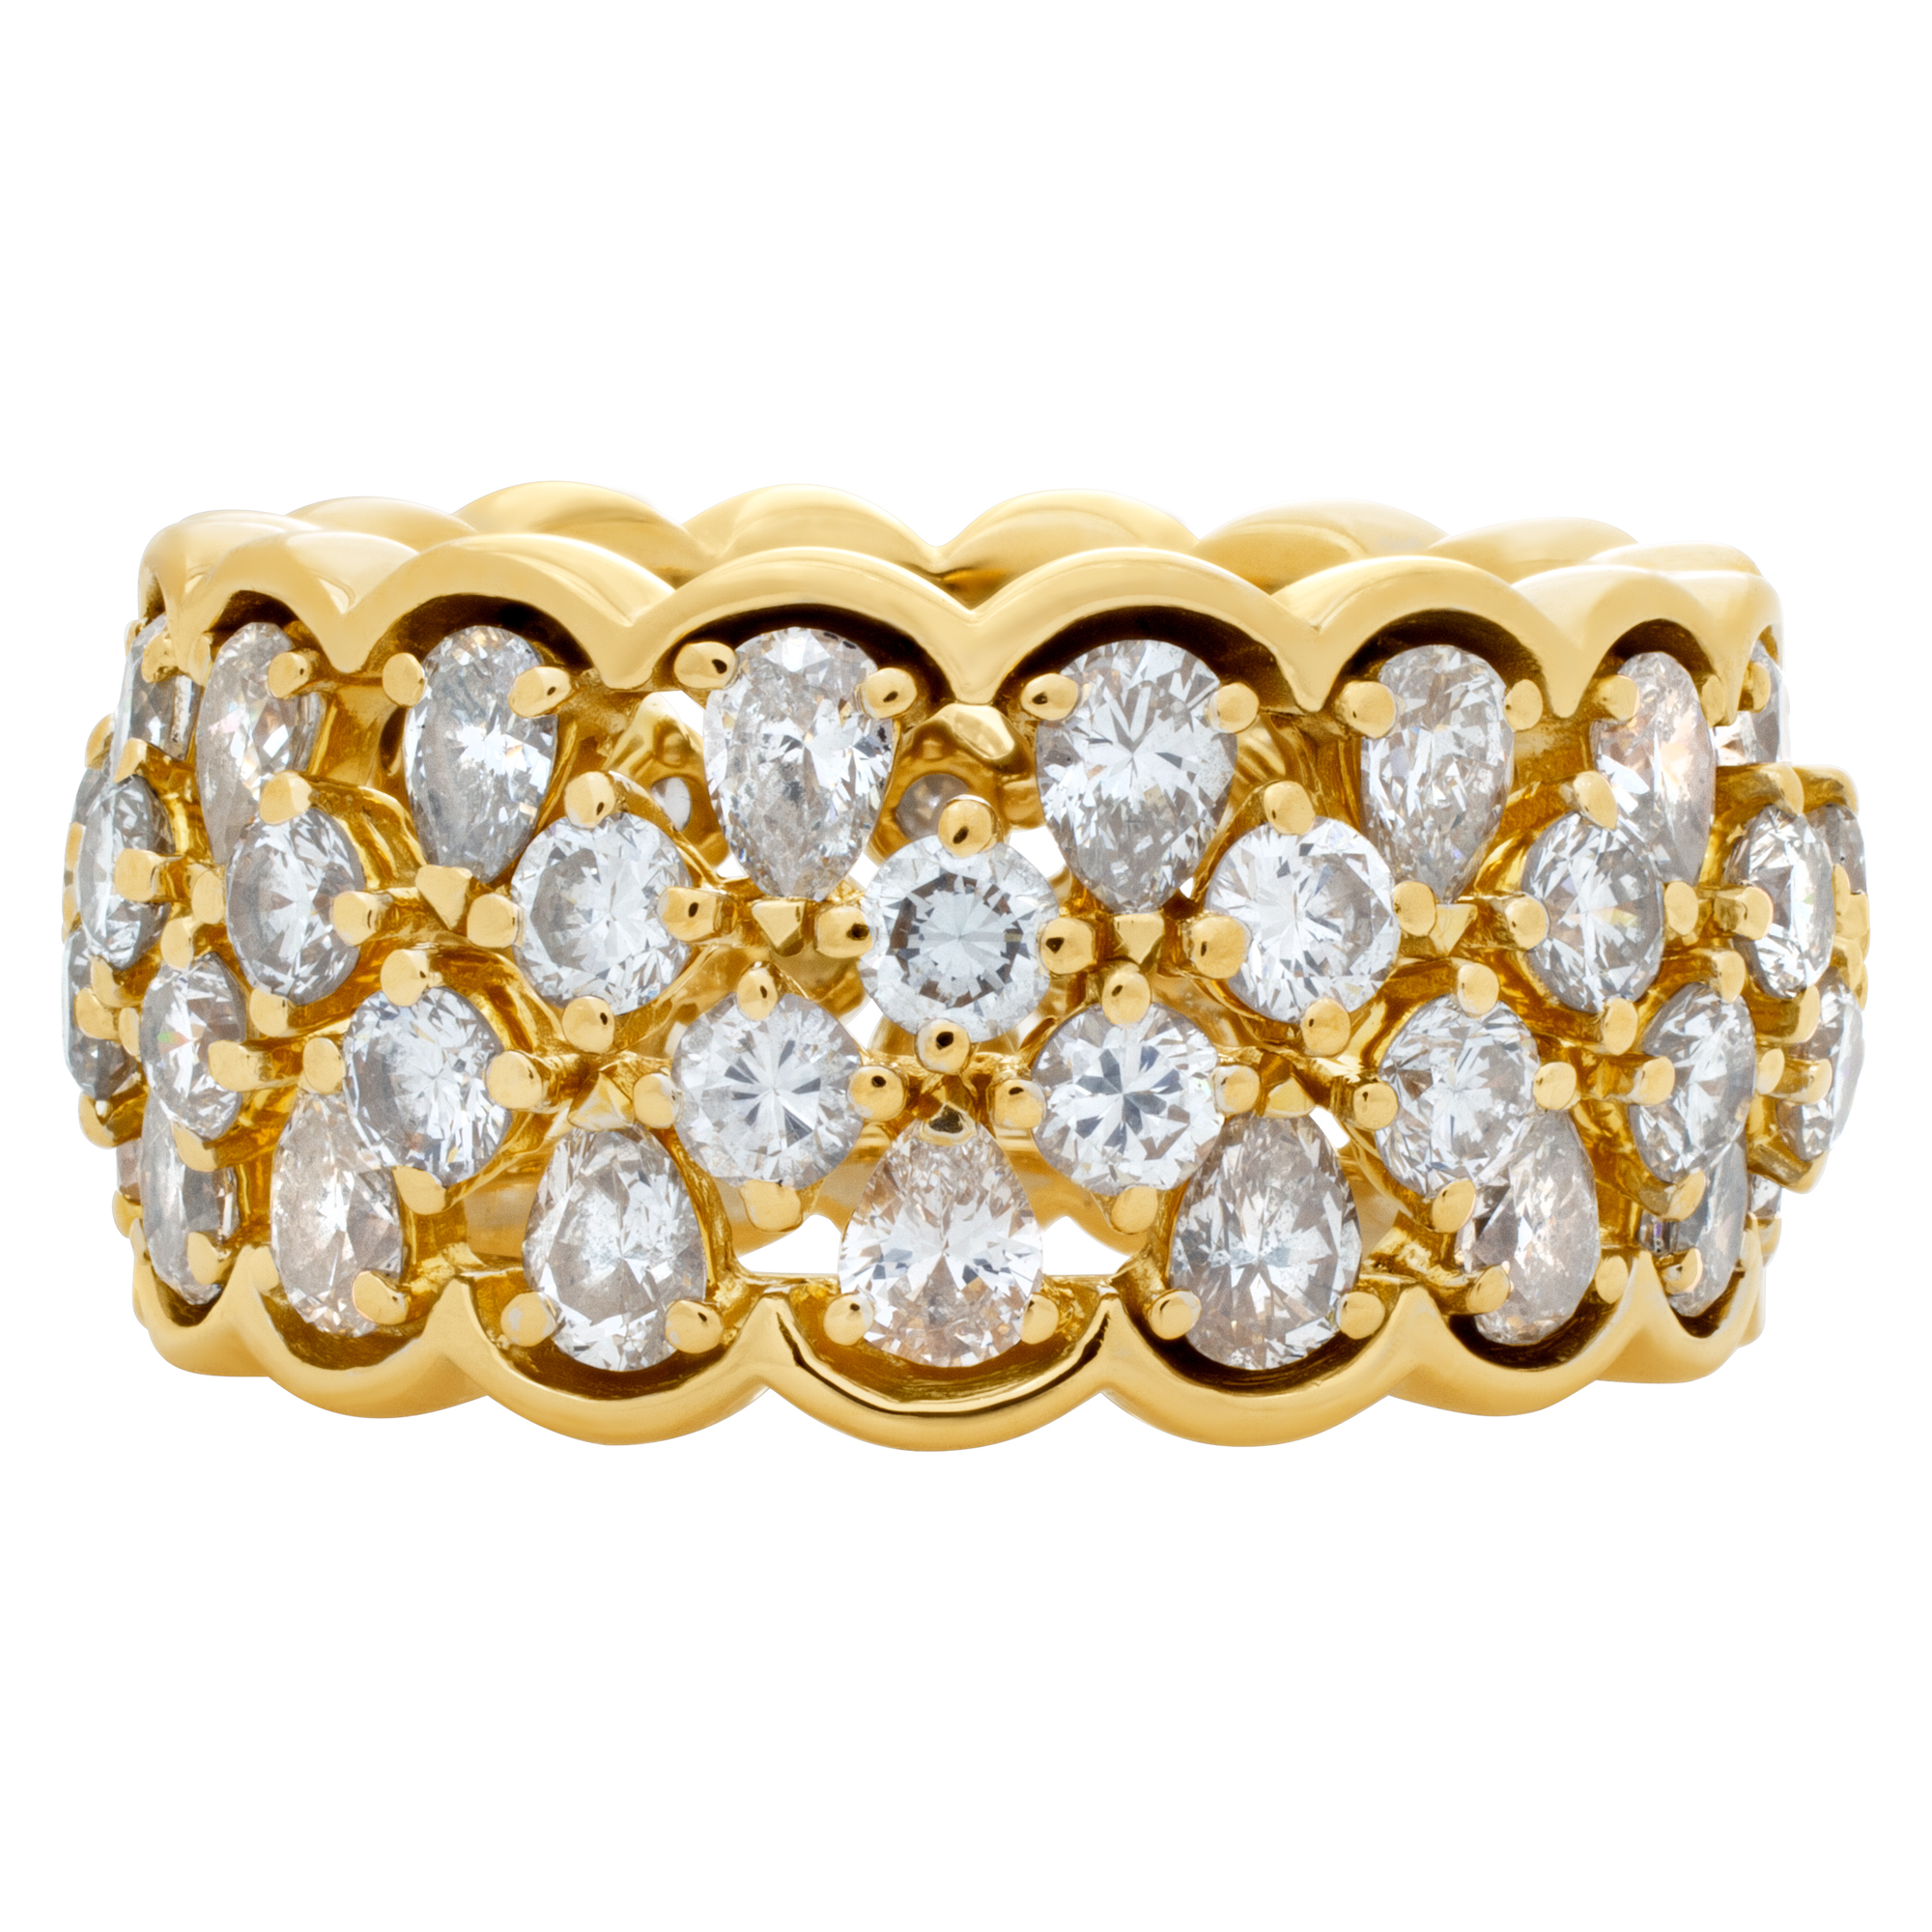 Wide "Eternity" band with approximately 5.00 carats full cut round brilliant & pear shape diamonds, set in 18K yellow gold image 2